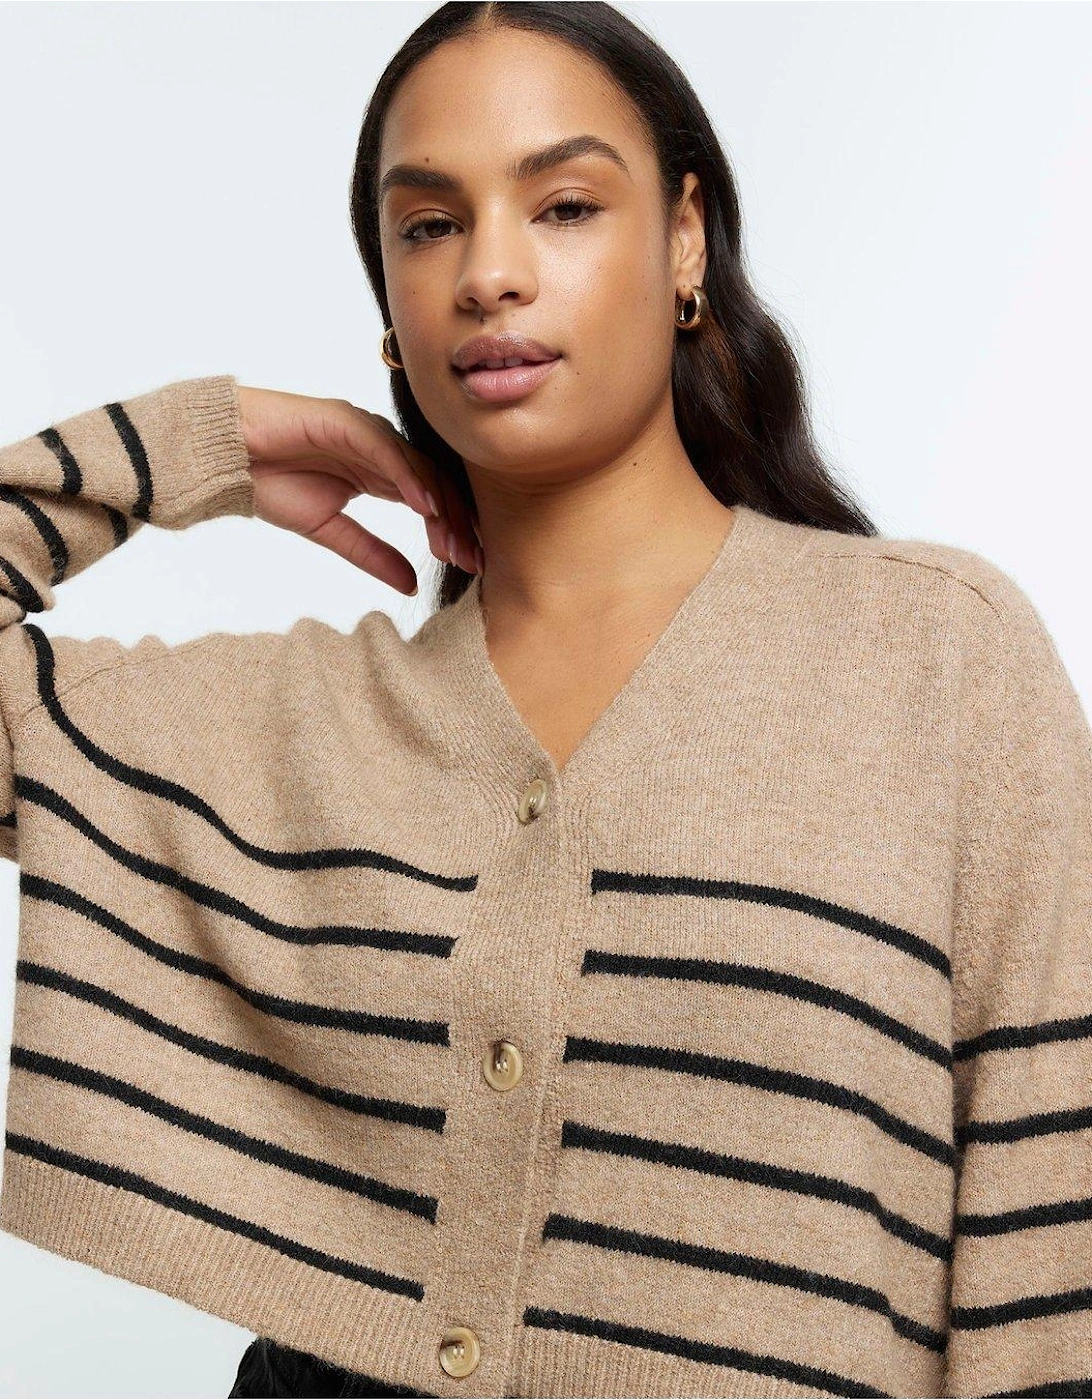 Cropped Knit Cardigan - Light Brown